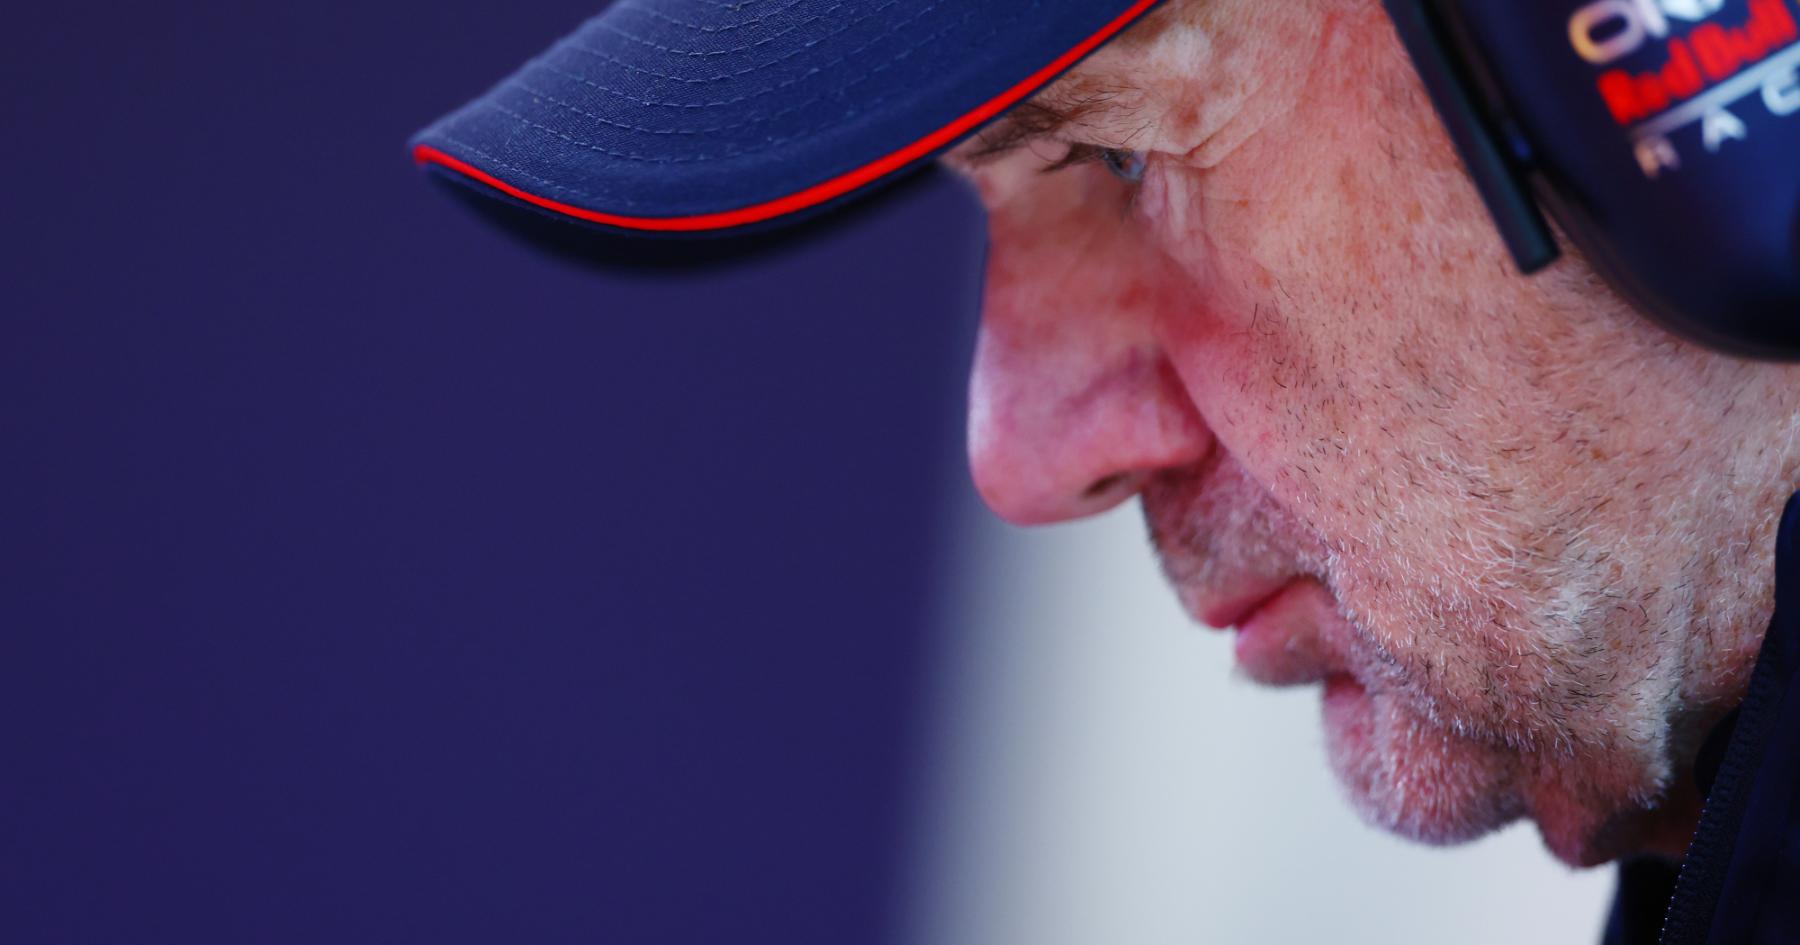 The End of an Era: Adrian Newey's Departure and Red Bull's Future